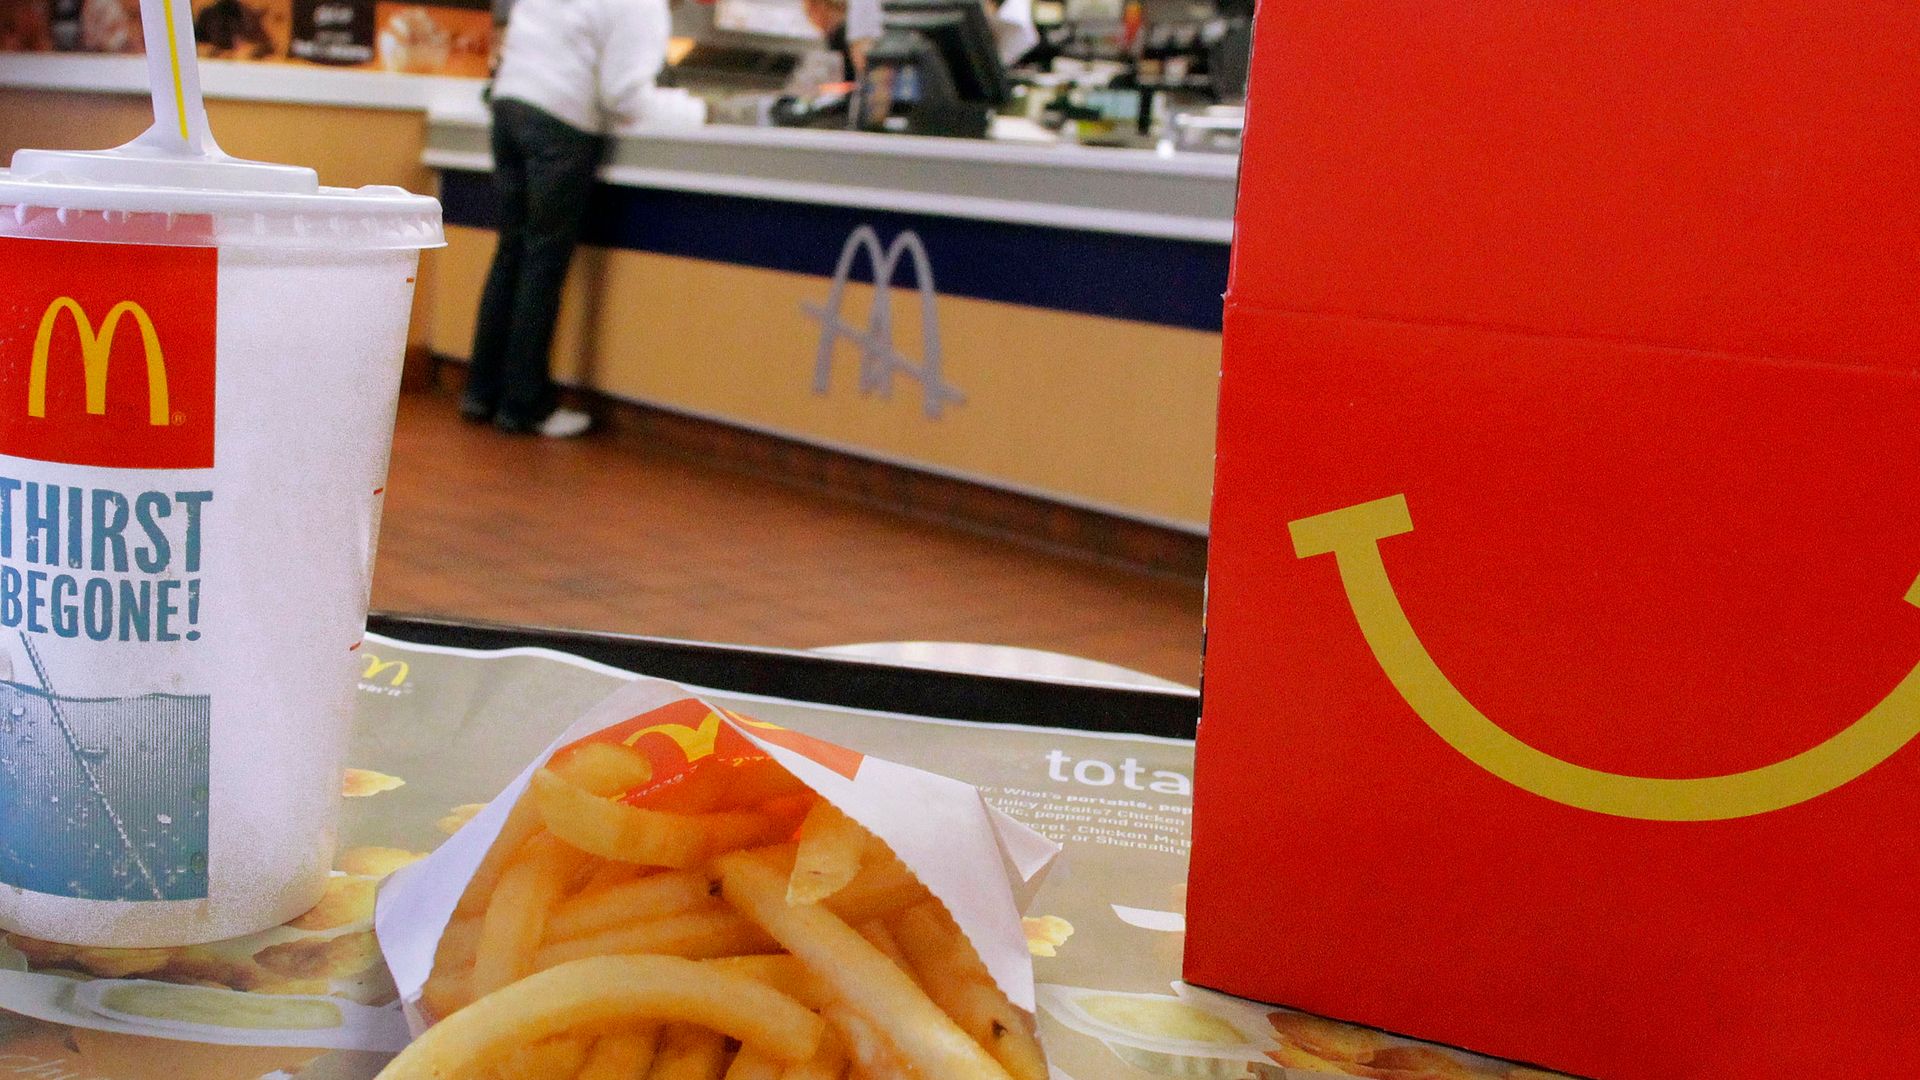 Fast-food workers in California are set to see an increase in their hourly wages following a recent labor agreement.